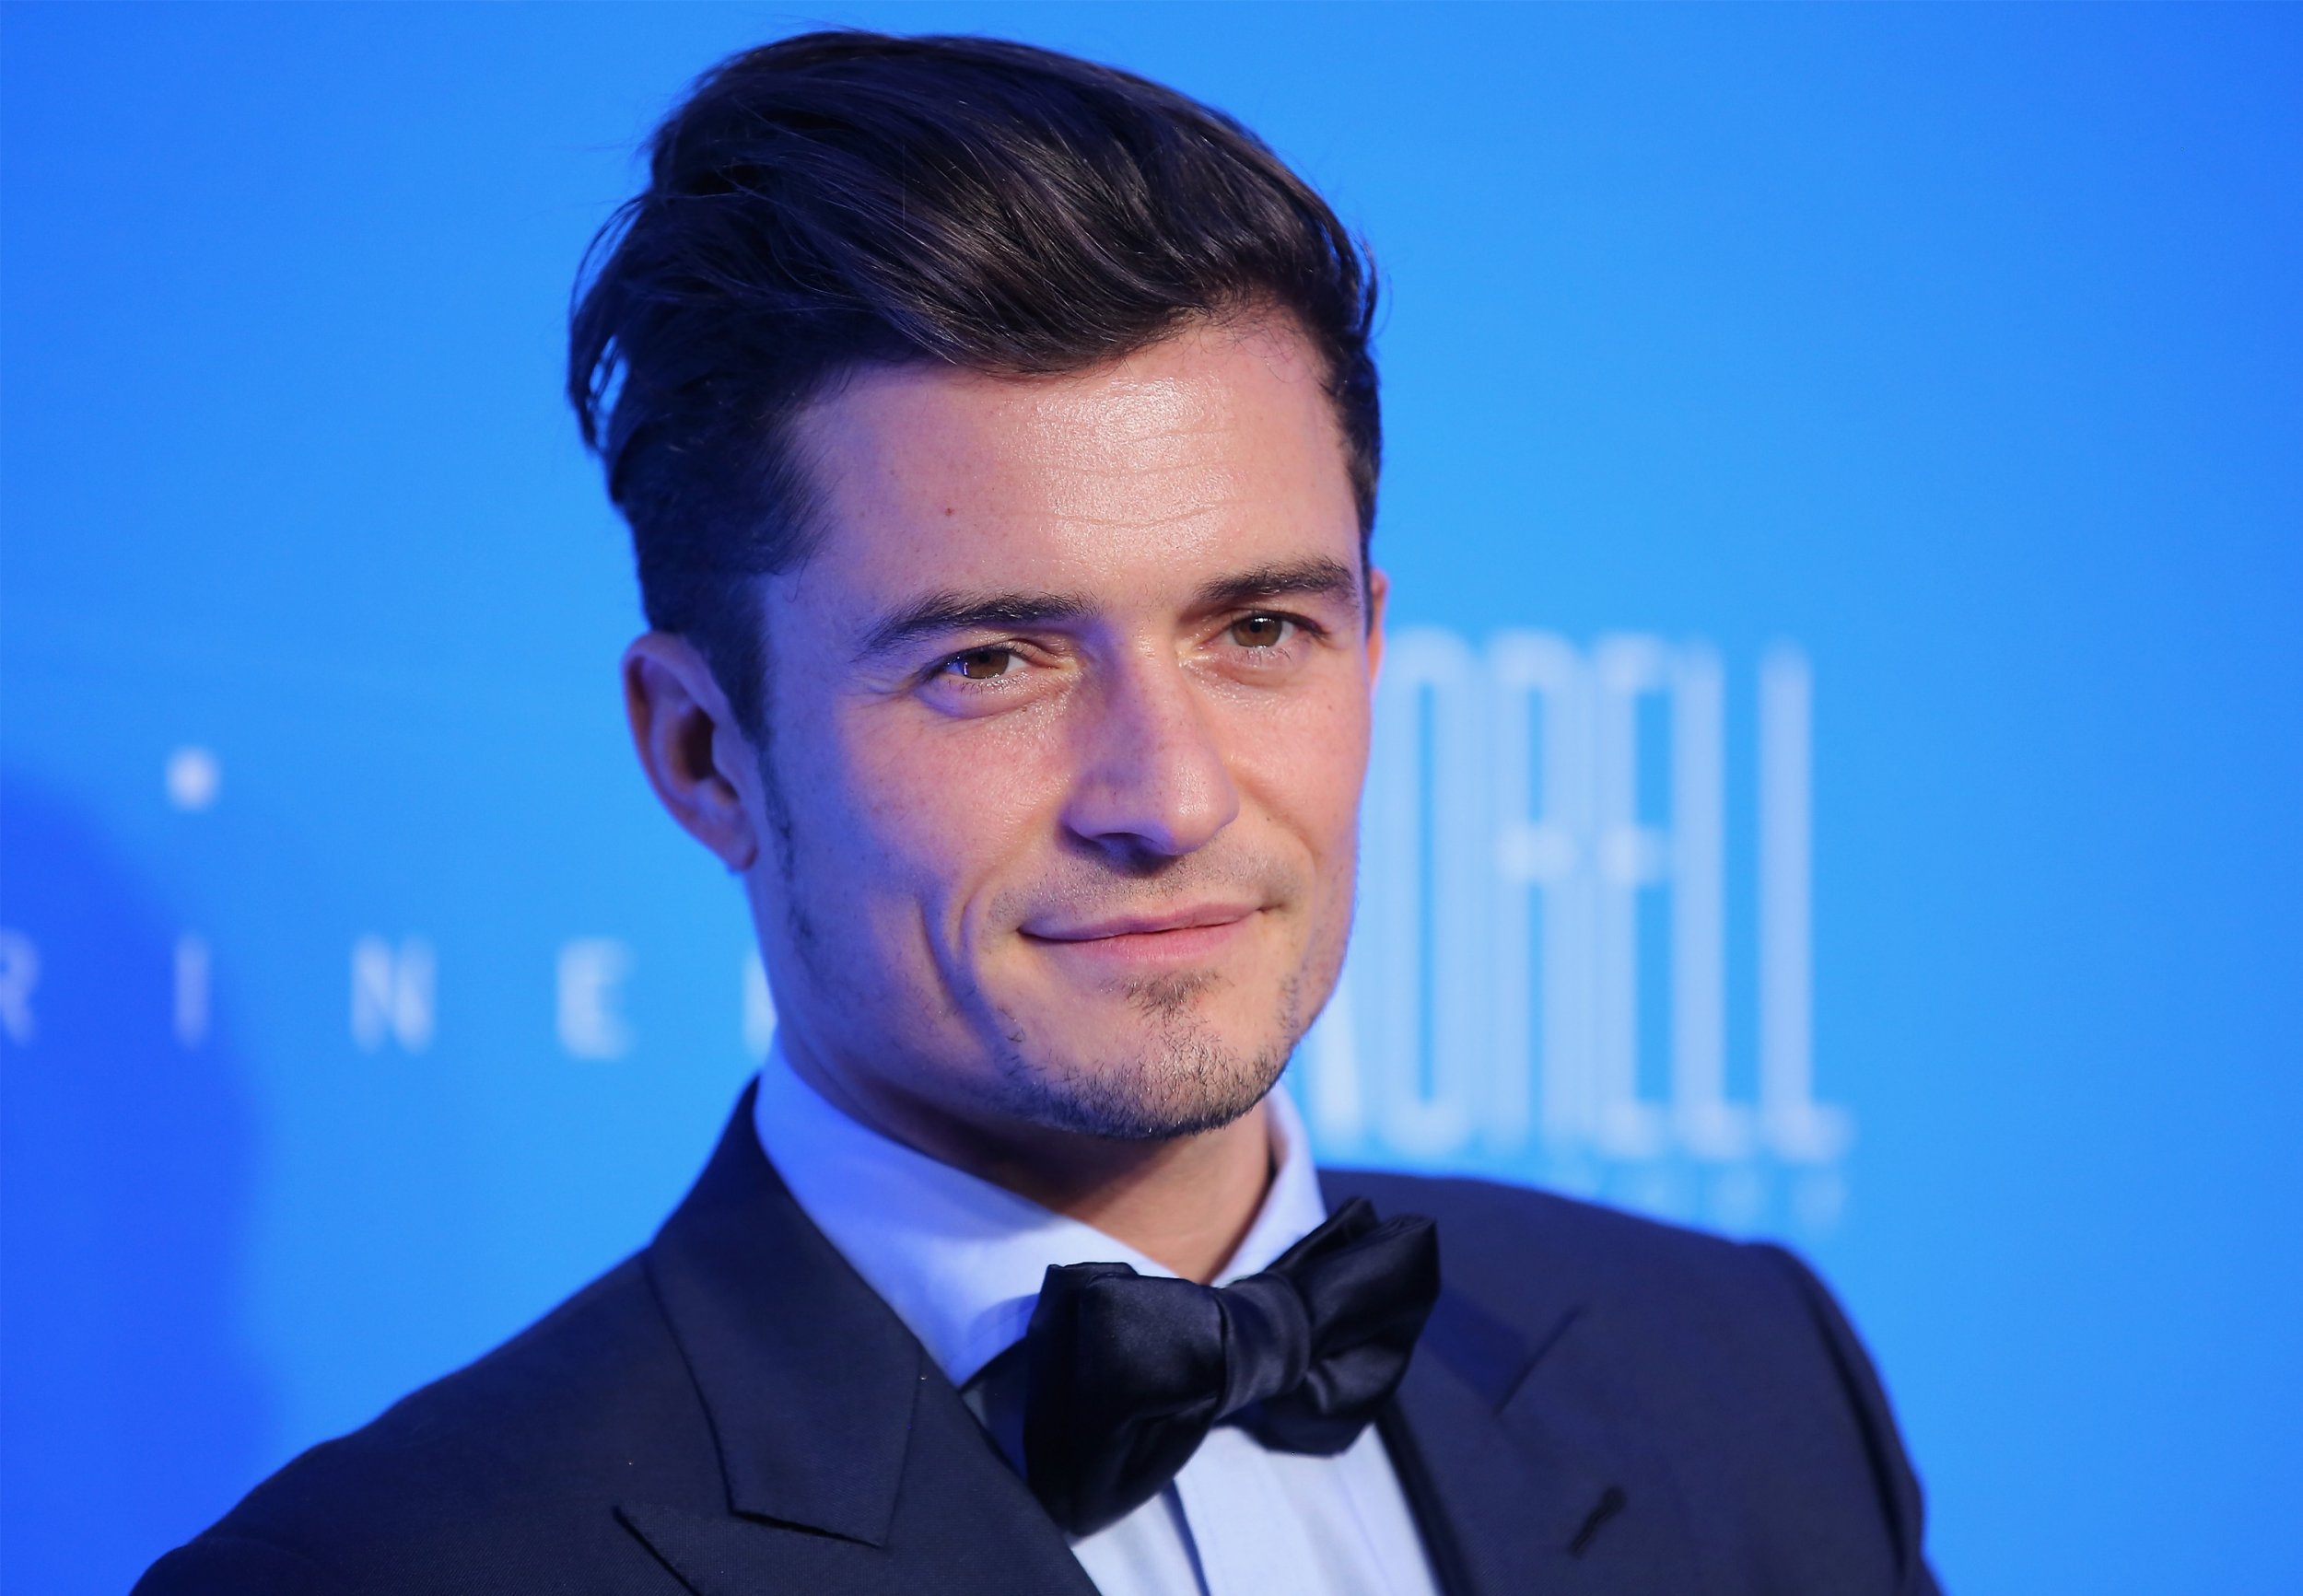 Orlando Bloom and Katy Perry were engaged on Valentine's Day 2019